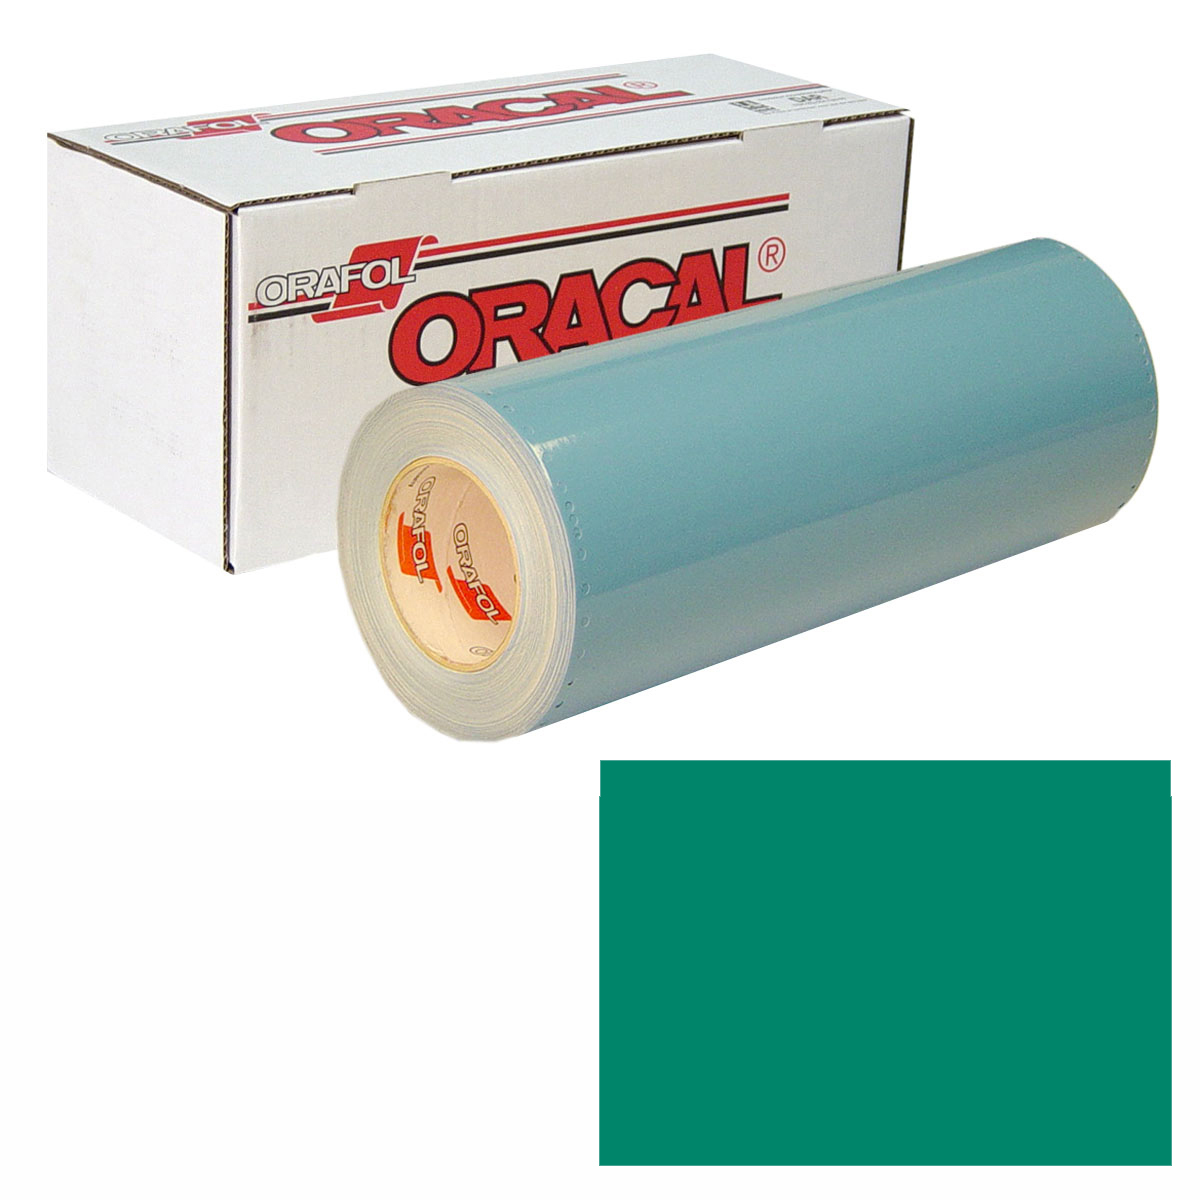 ORACAL 751 Unp 24in X 10yd 607 Turquoise Gree